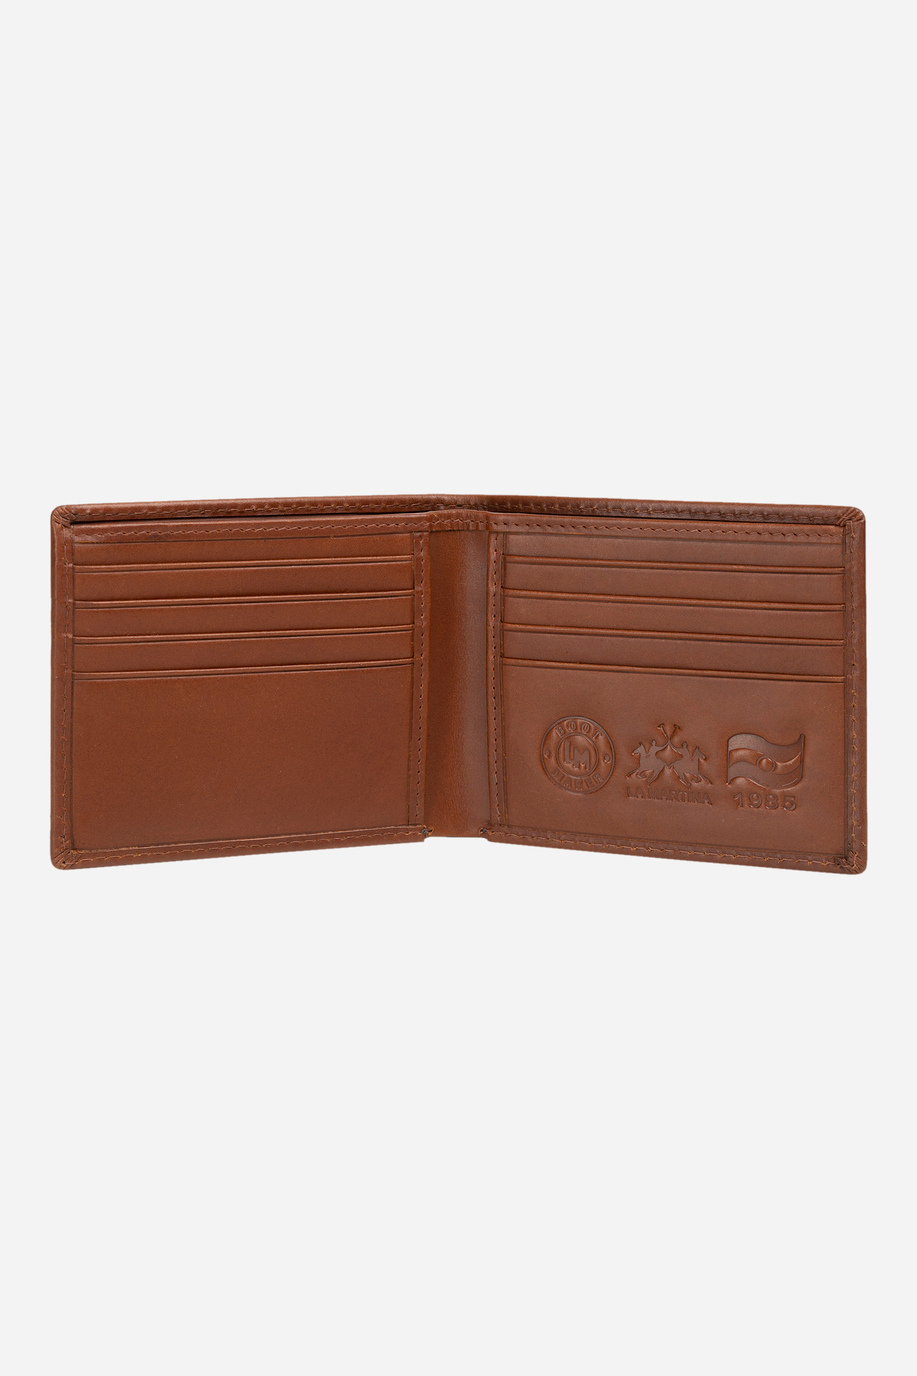 Men's leather wallet - Axel - Wallets and key chains | La Martina - Official Online Shop